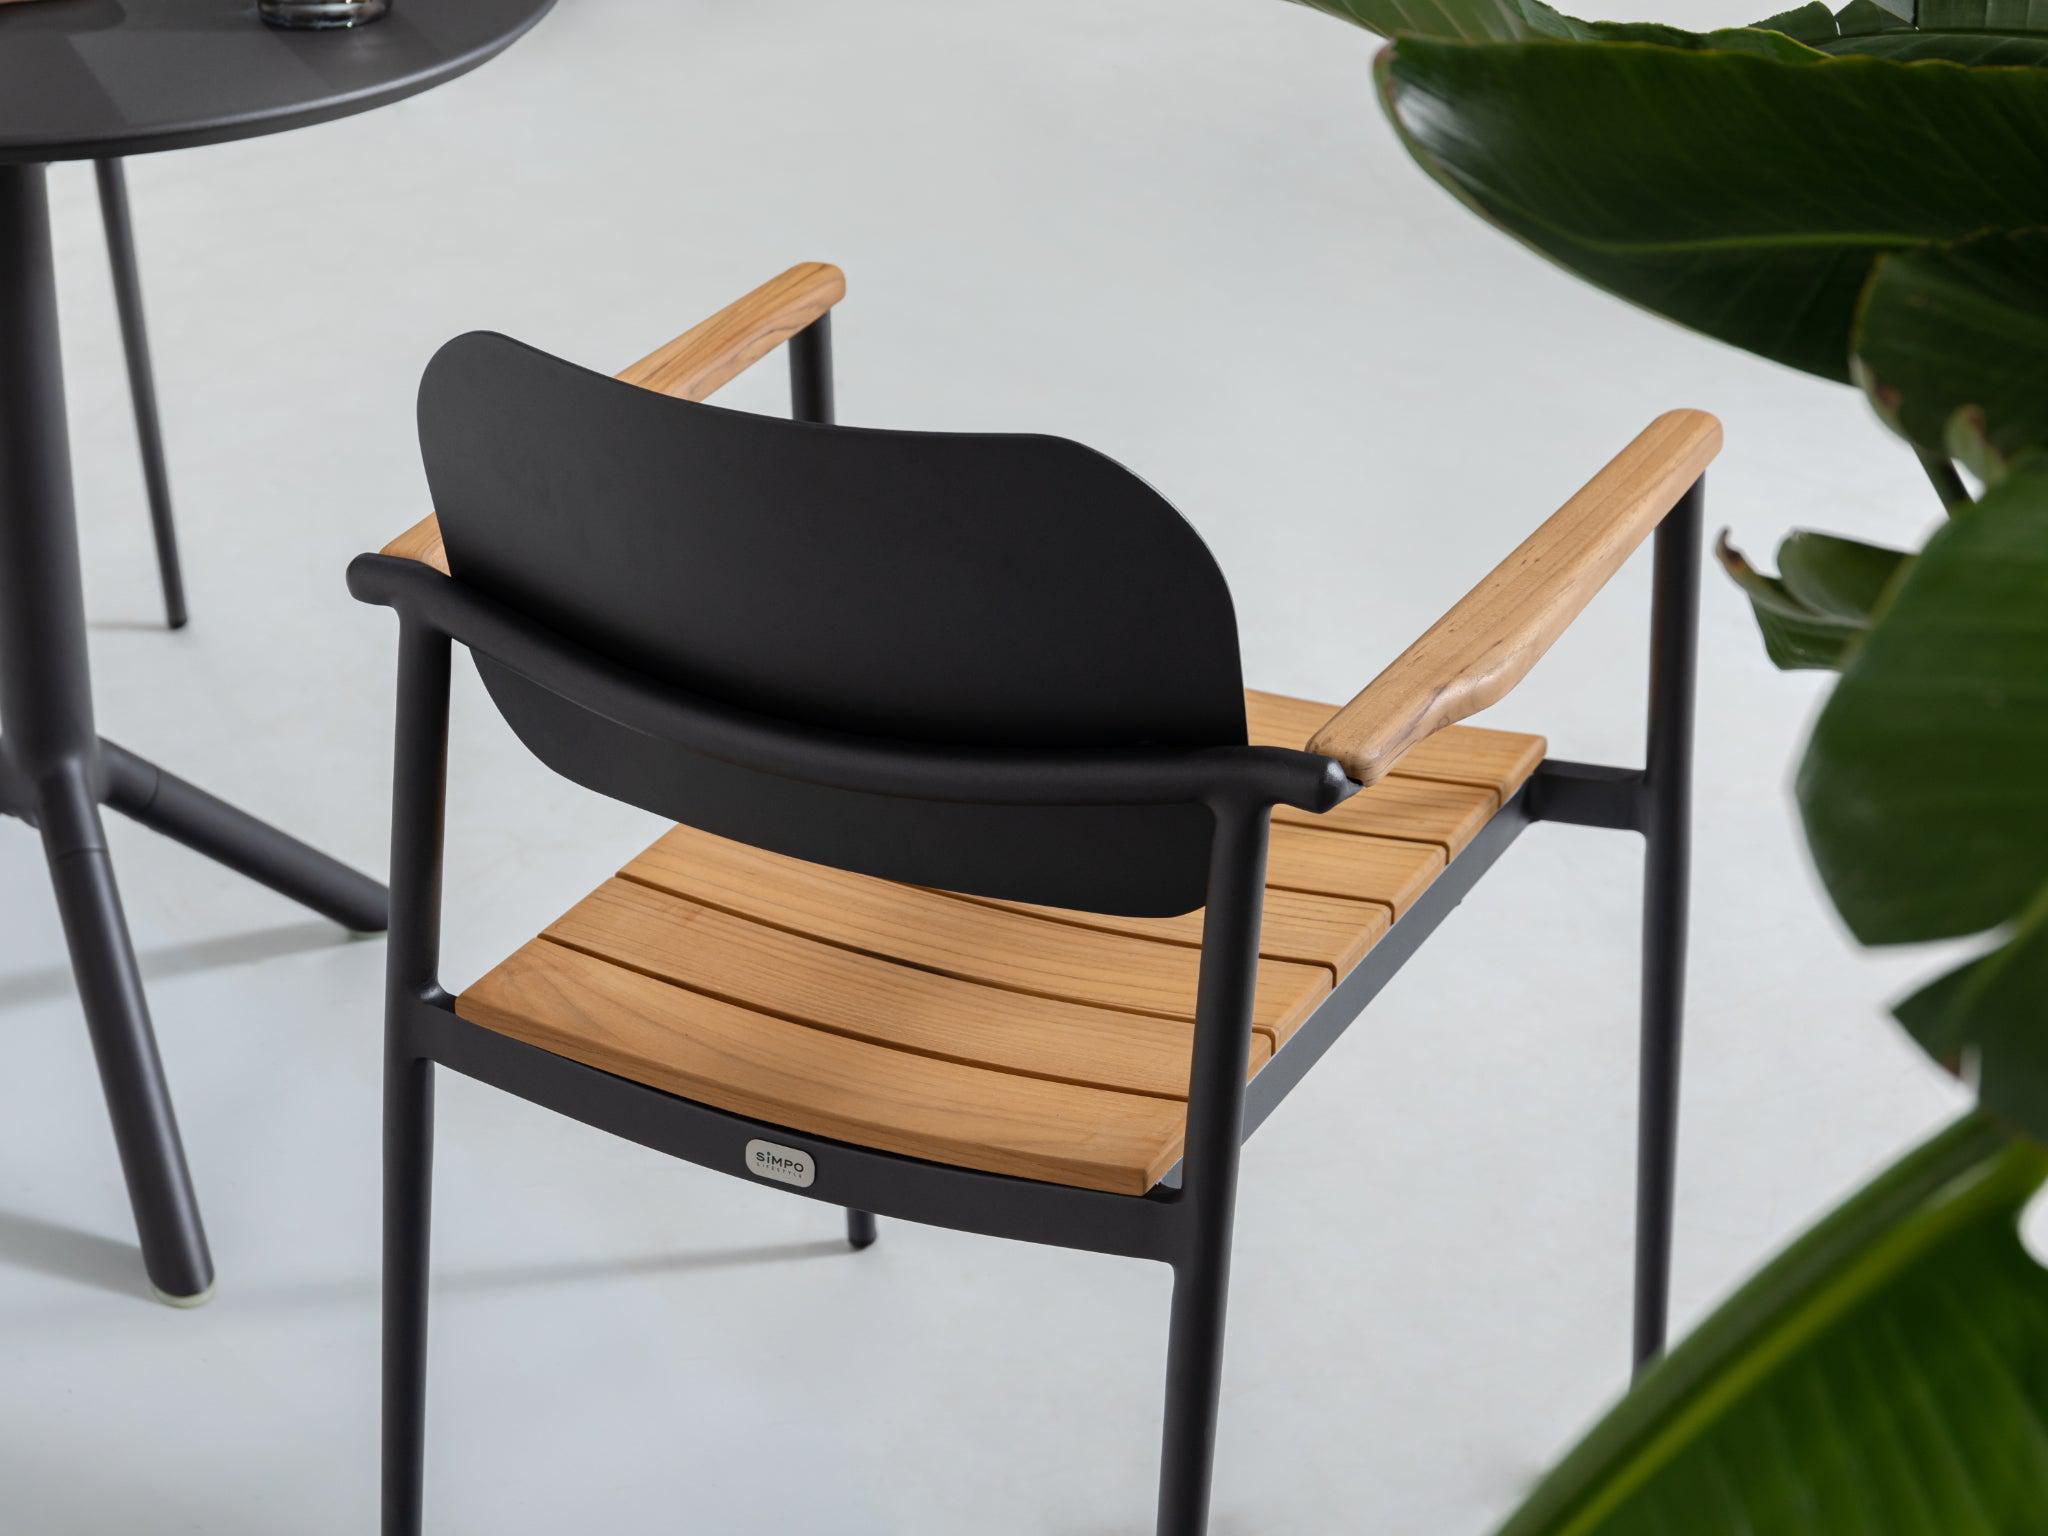 SIMPO Pier Outdoor Dining Chair